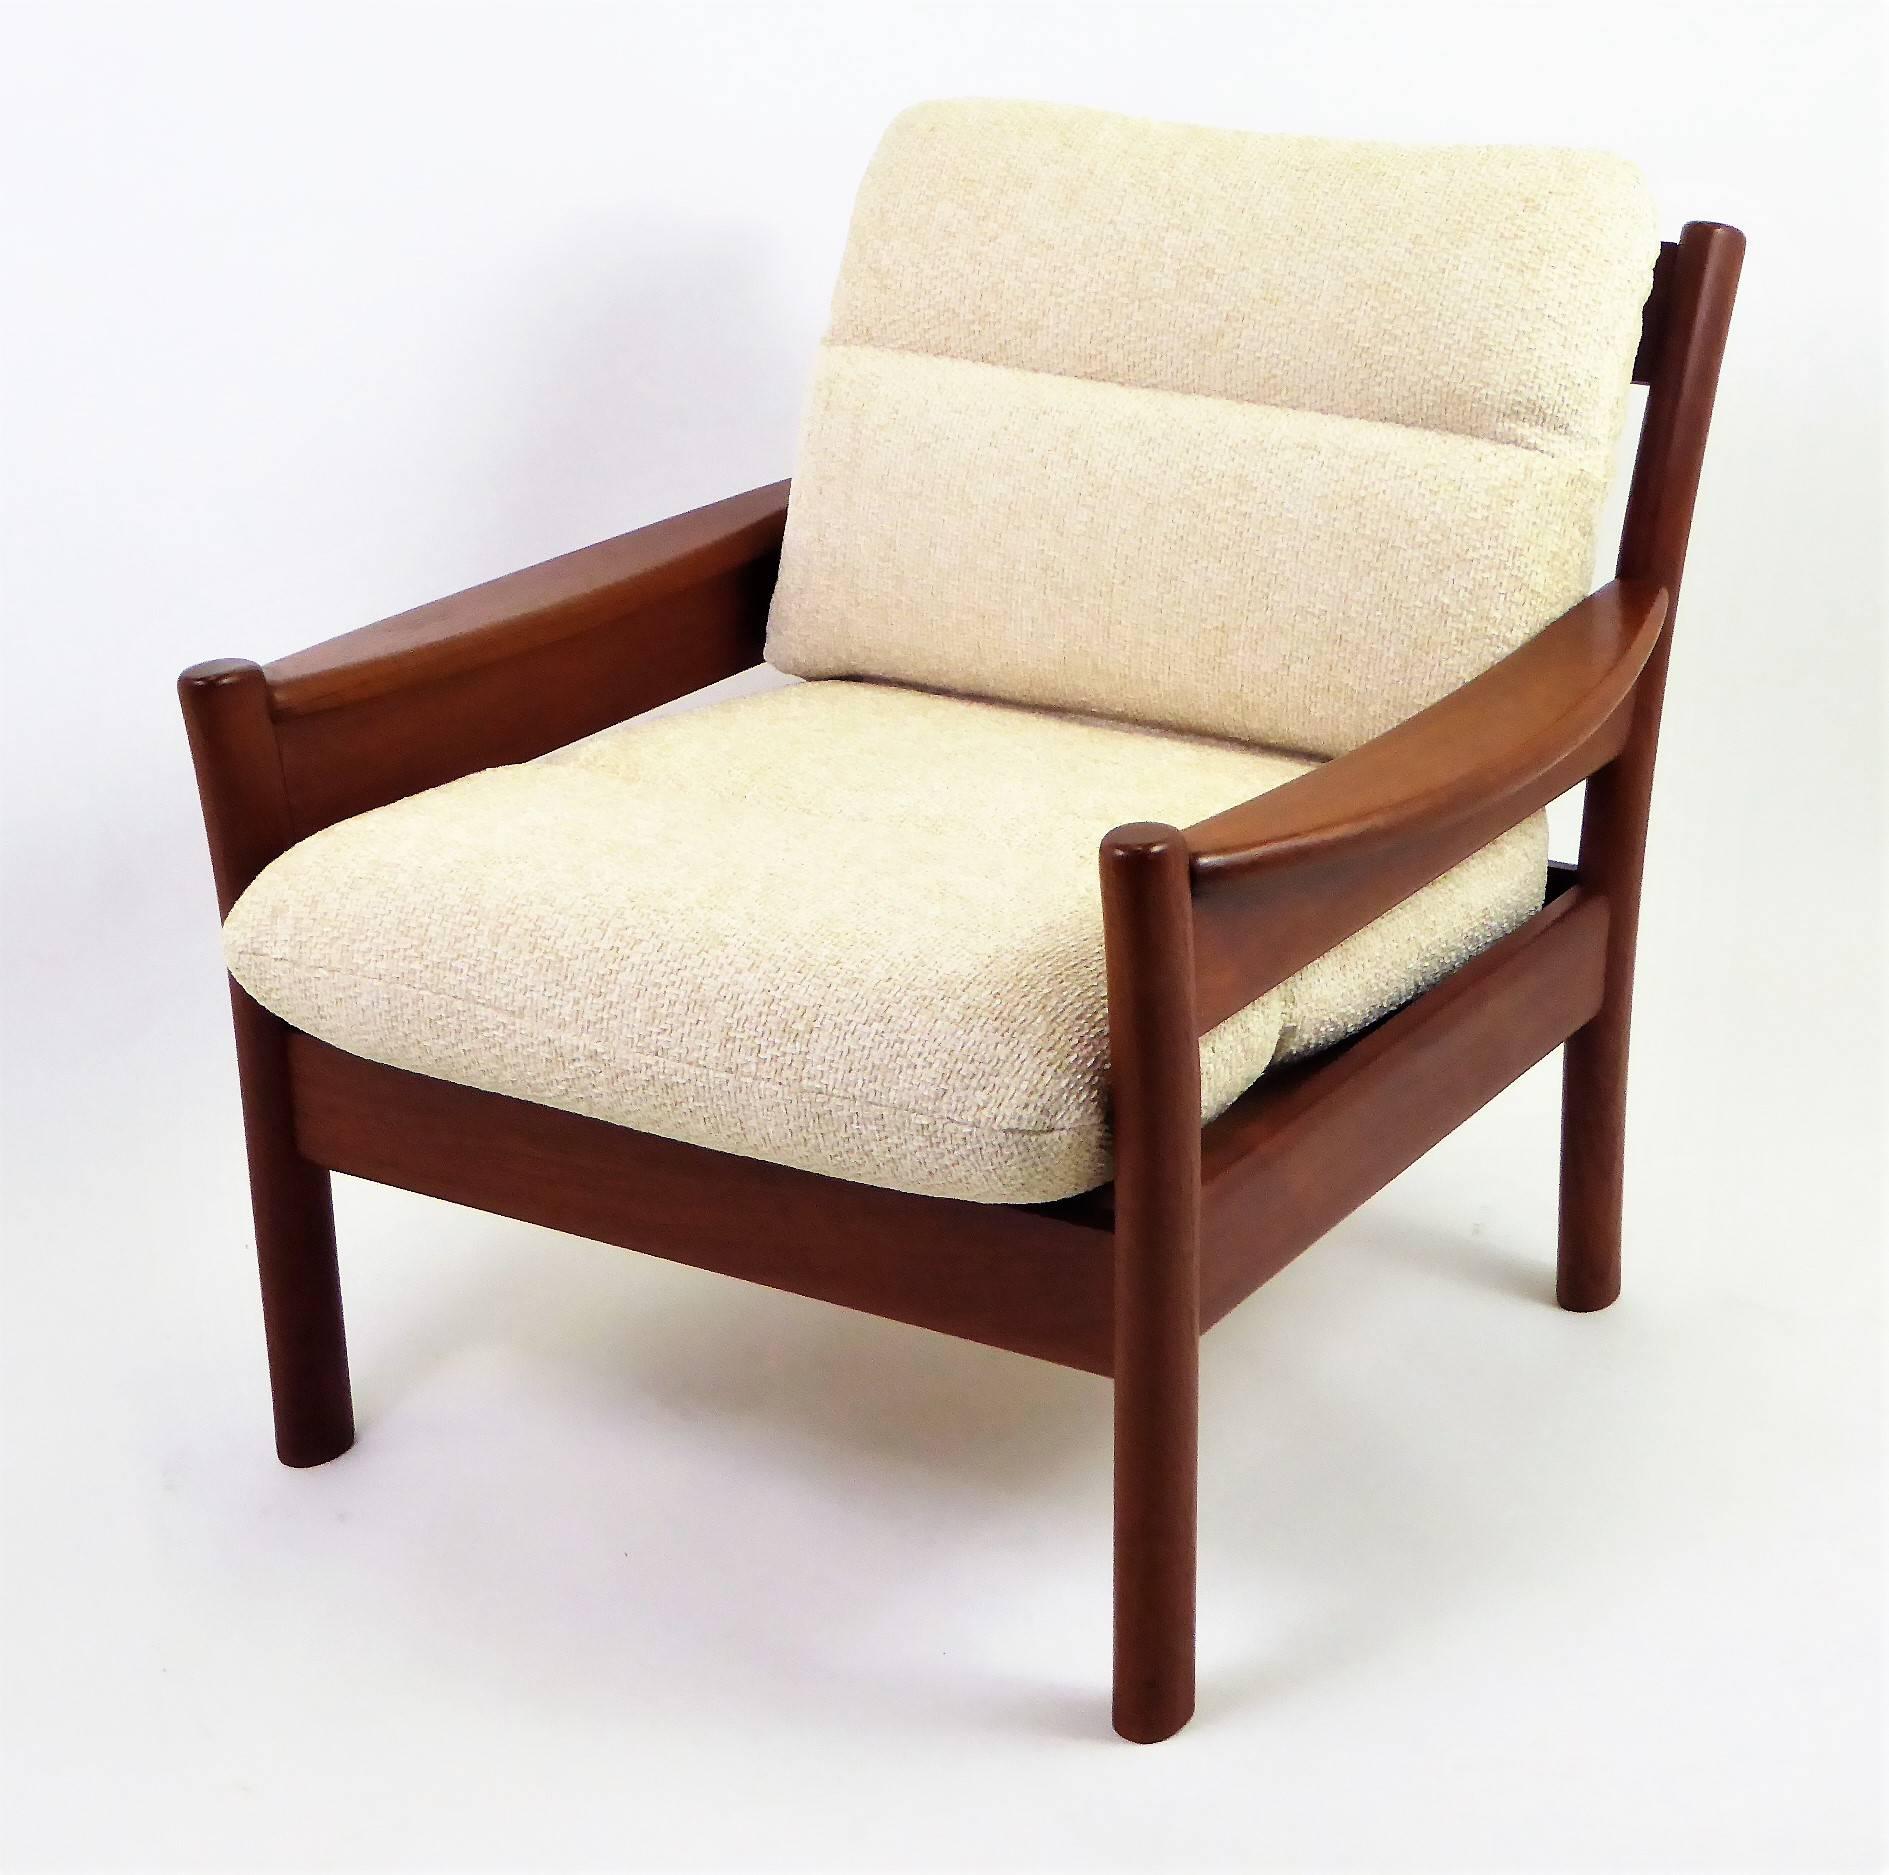 Fine 1960s Dyrlund of Denmark solid teak armchair with fitted cushions in new woven Chenille in a neutral cream color. Warm, rich, solid Teak all around with unique carved legs and wide shaped armrests. Slatted back. Dyrlund label. New Pirelli